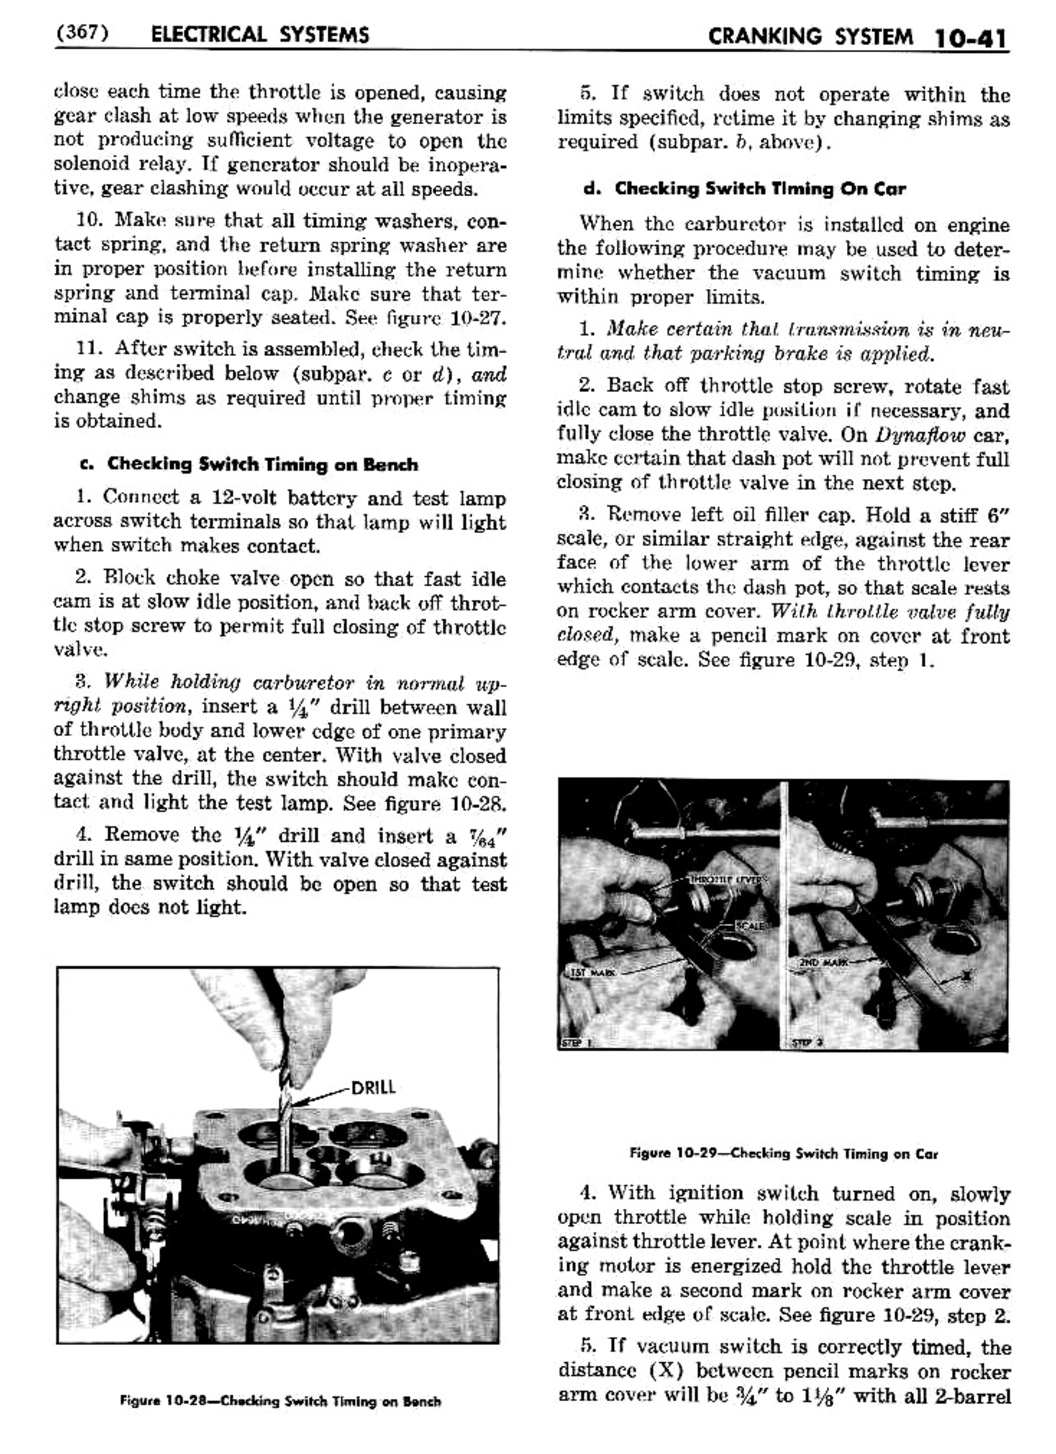 n_11 1956 Buick Shop Manual - Electrical Systems-041-041.jpg